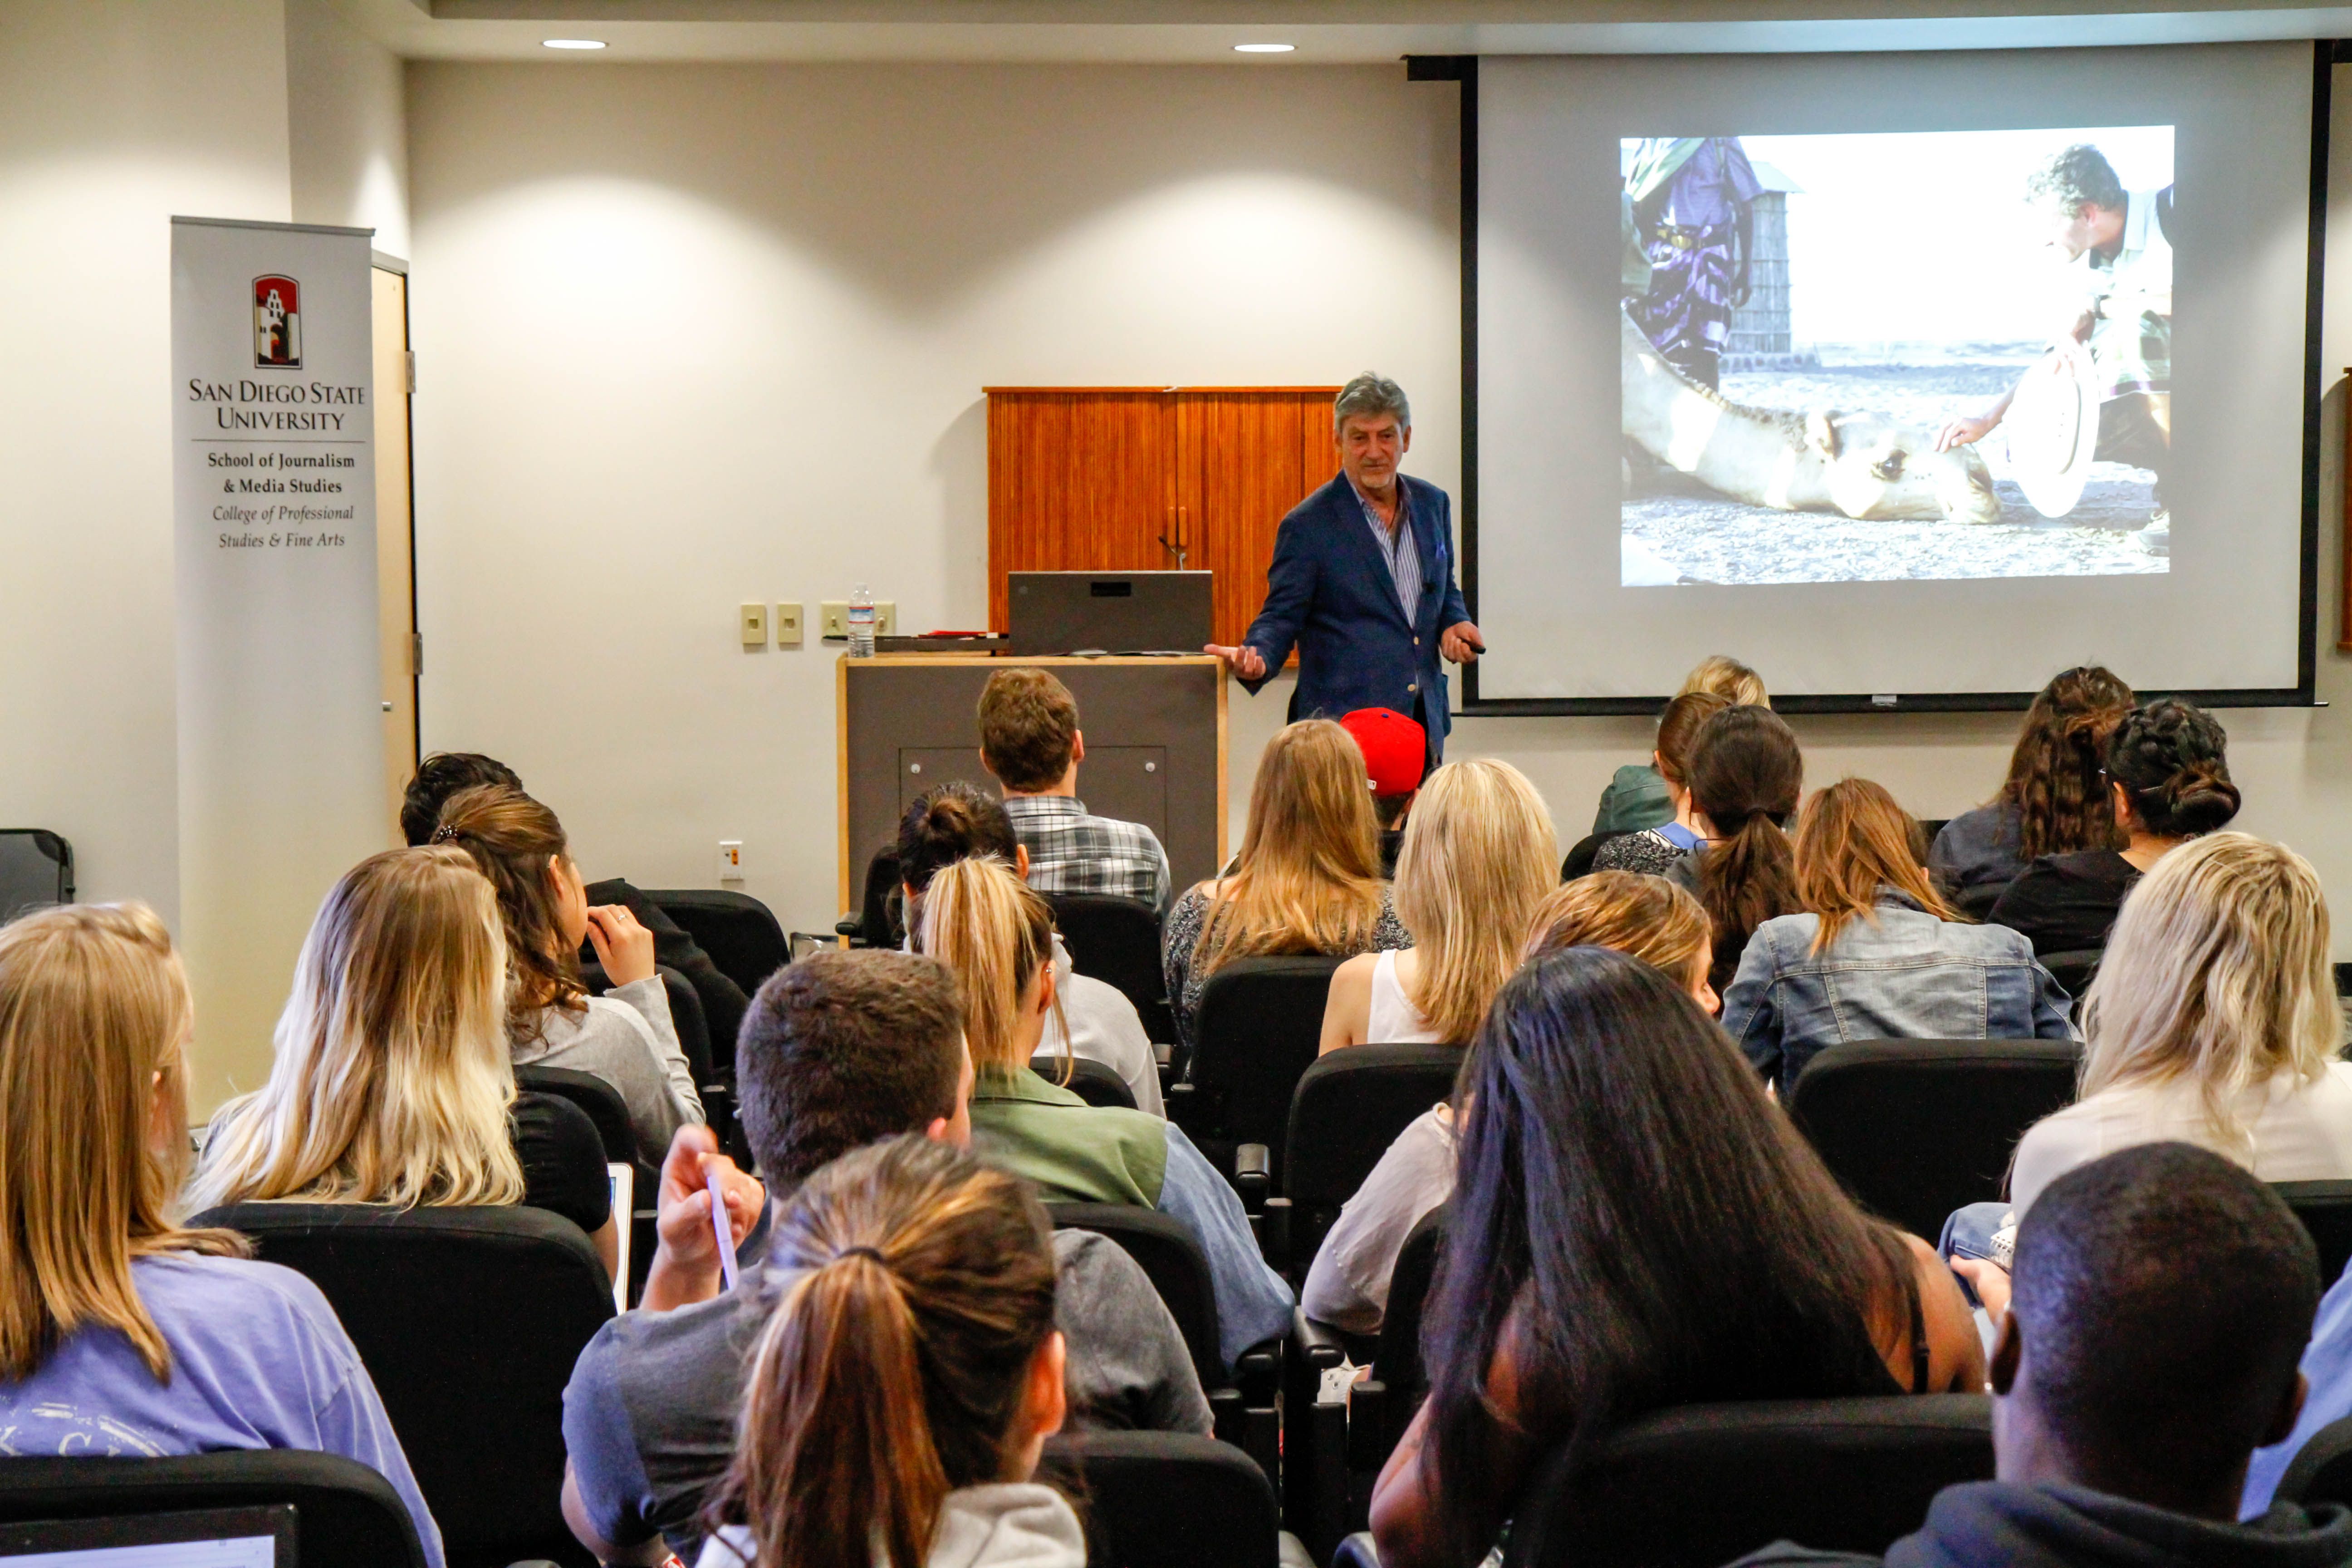 At San Diego State University, Don Belt speaks a room of 80 people, including faculty, students and the local public about his journey to National Geographic and his work with building curriculum and workshops using lessons from Paul Salopek's Out of Eden Walk. Image by Lauren Shepherd. United States, 2017.